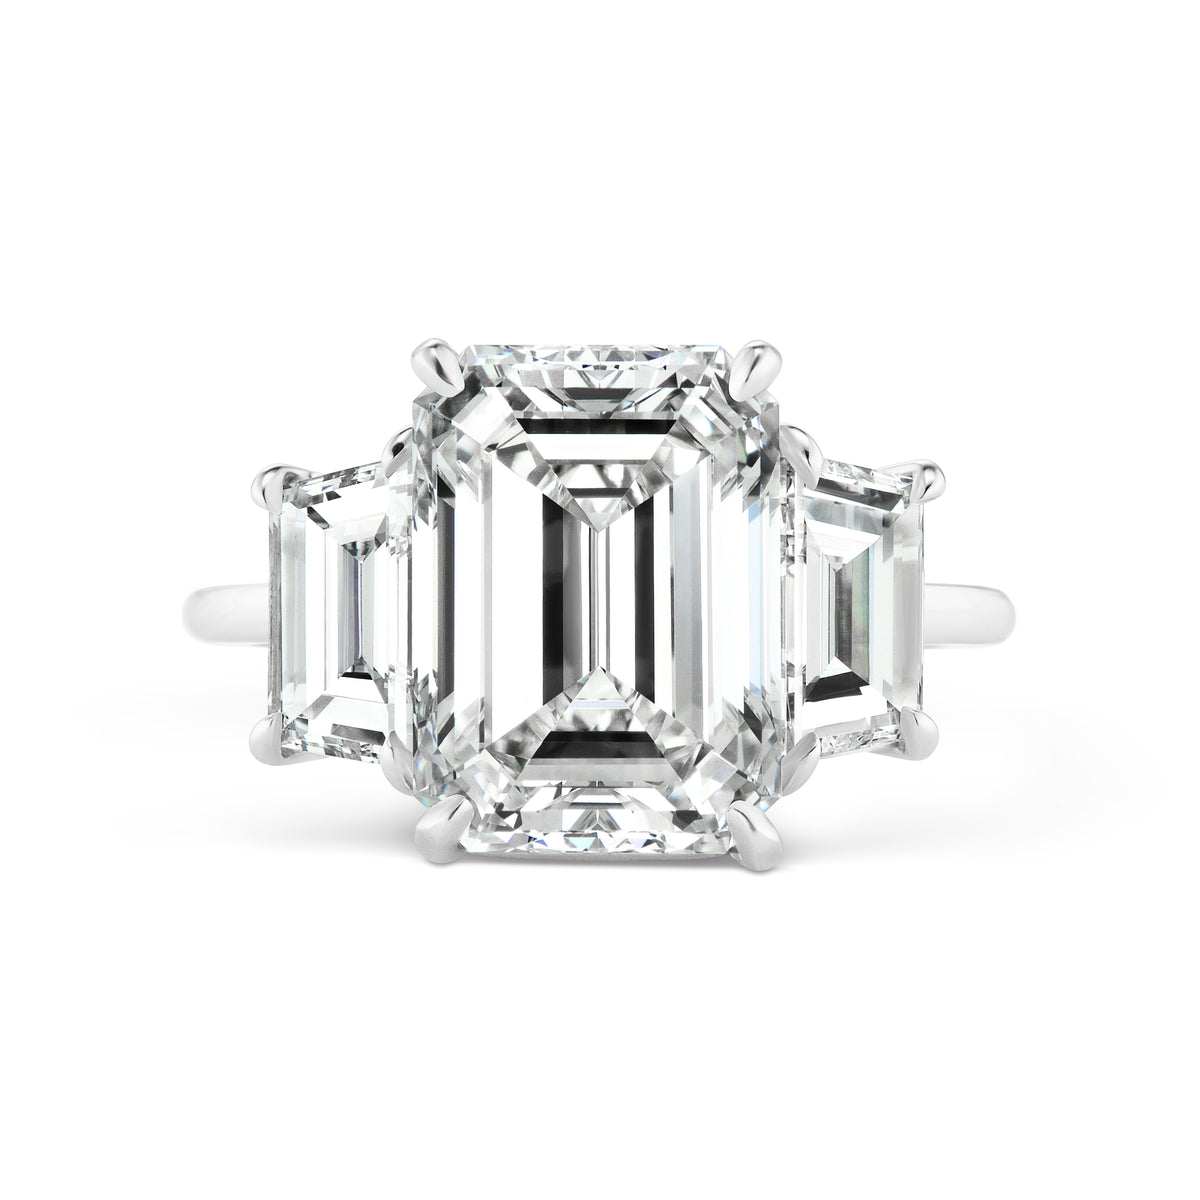 Emerald Cut Diamond Engagement Ring with Trapezoid Side Stones